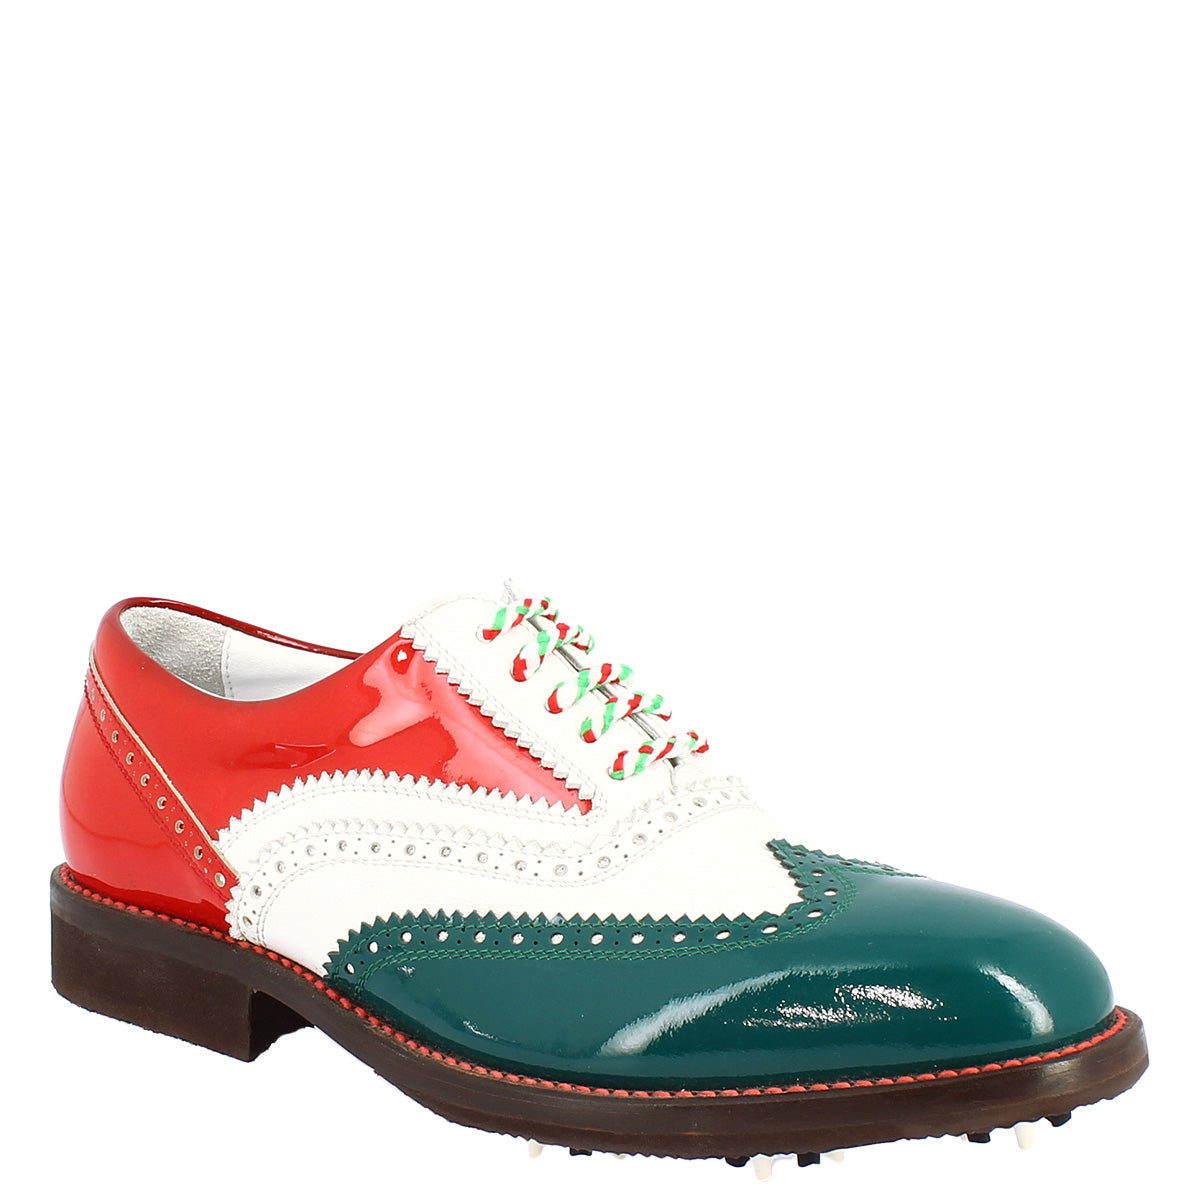 Handmade women's golf shoes in the colors of the Italian flag